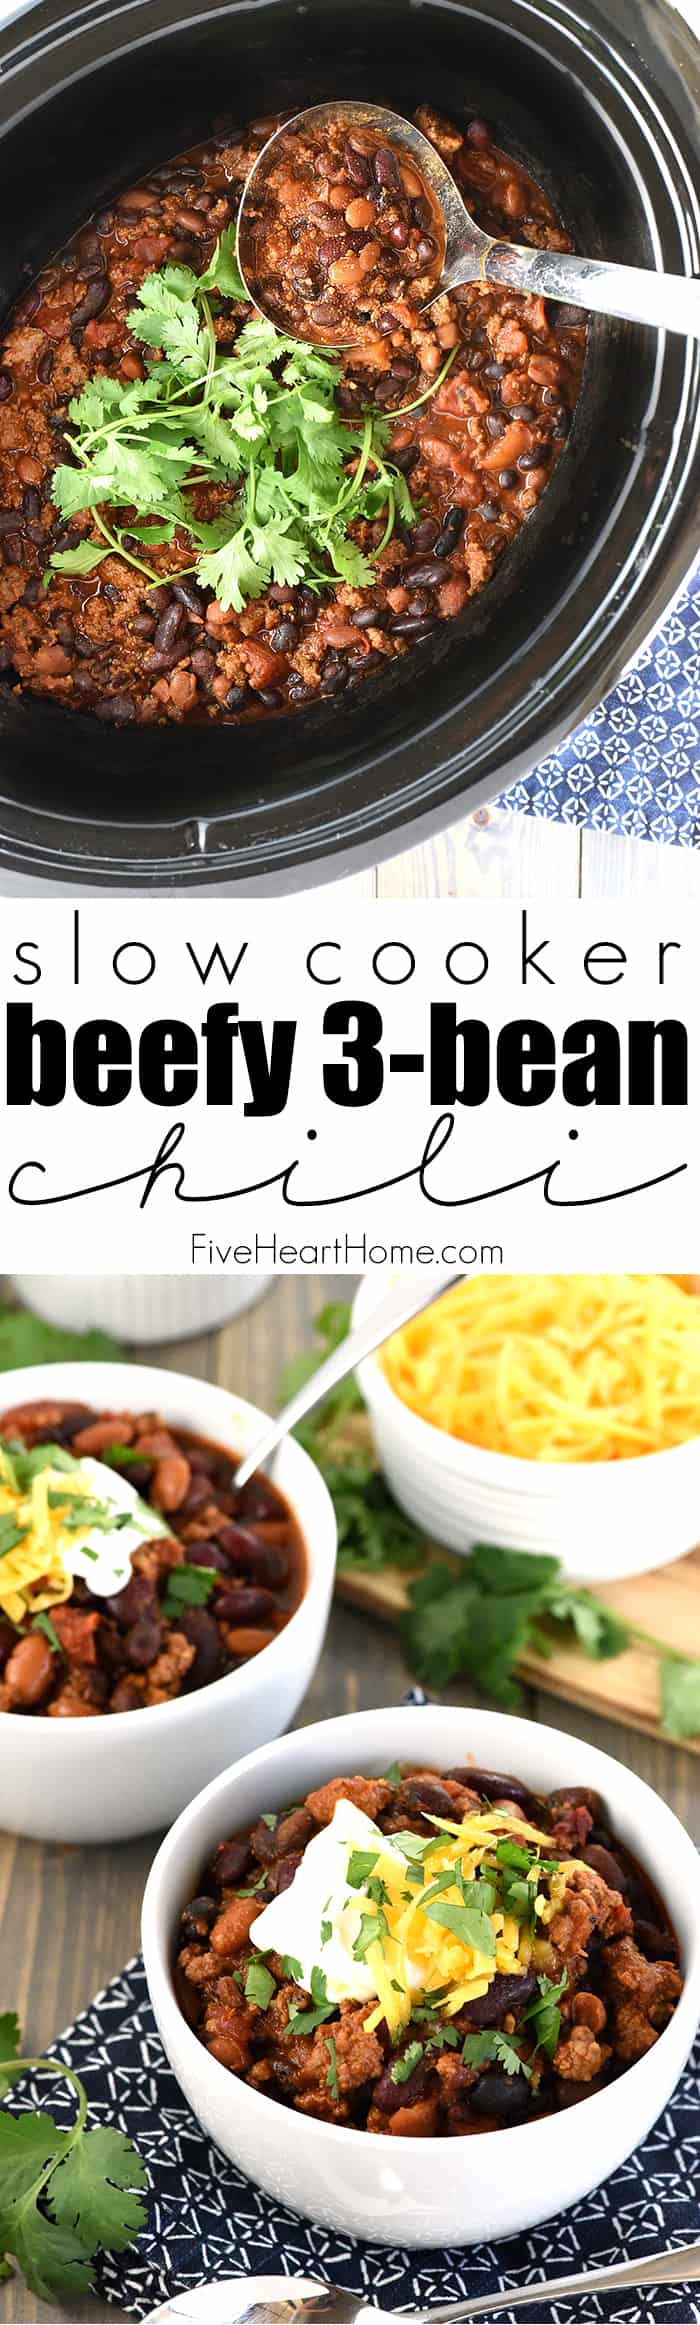 3 Bean Chili ~ a chunky, flavorful, hearty bowl of comfort food goodness loaded with savory ground beef and three kinds of beans...and it's easy to make on the stovetop or in the slow cooker! | FiveHeartHome.com via @fivehearthome